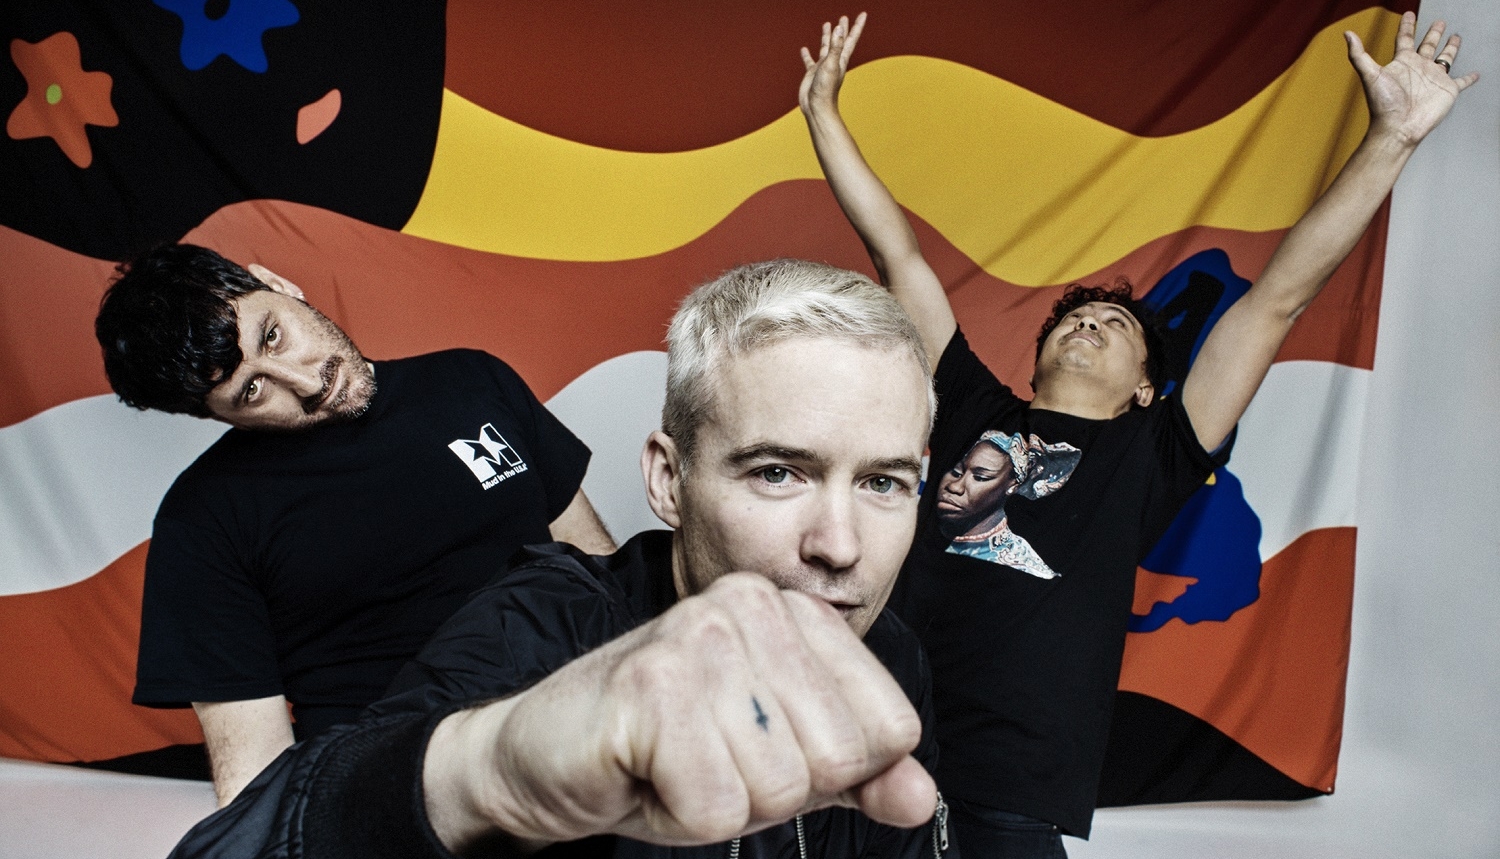 avalanches-general-use-image-june-2016.jpg